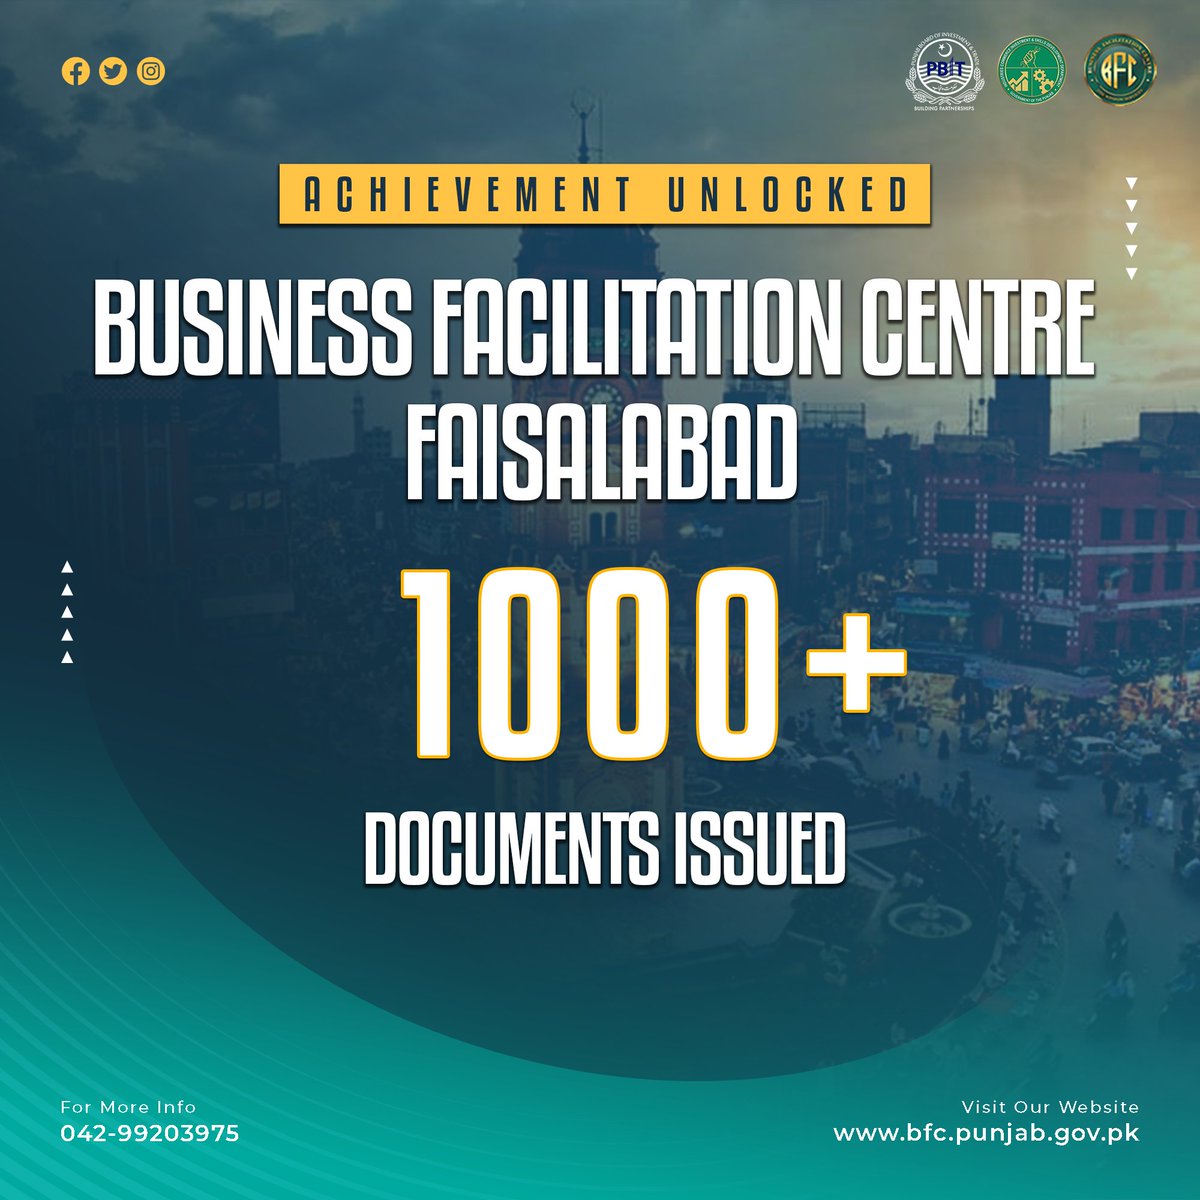 Achievement Unlocked!  The Business Facilitation Centre in Faisalabad has hit a major milestone: Over 1000 documents issued since its inception! 
 #BFCFaisalabad #MilestoneAchievement #businesssuccess